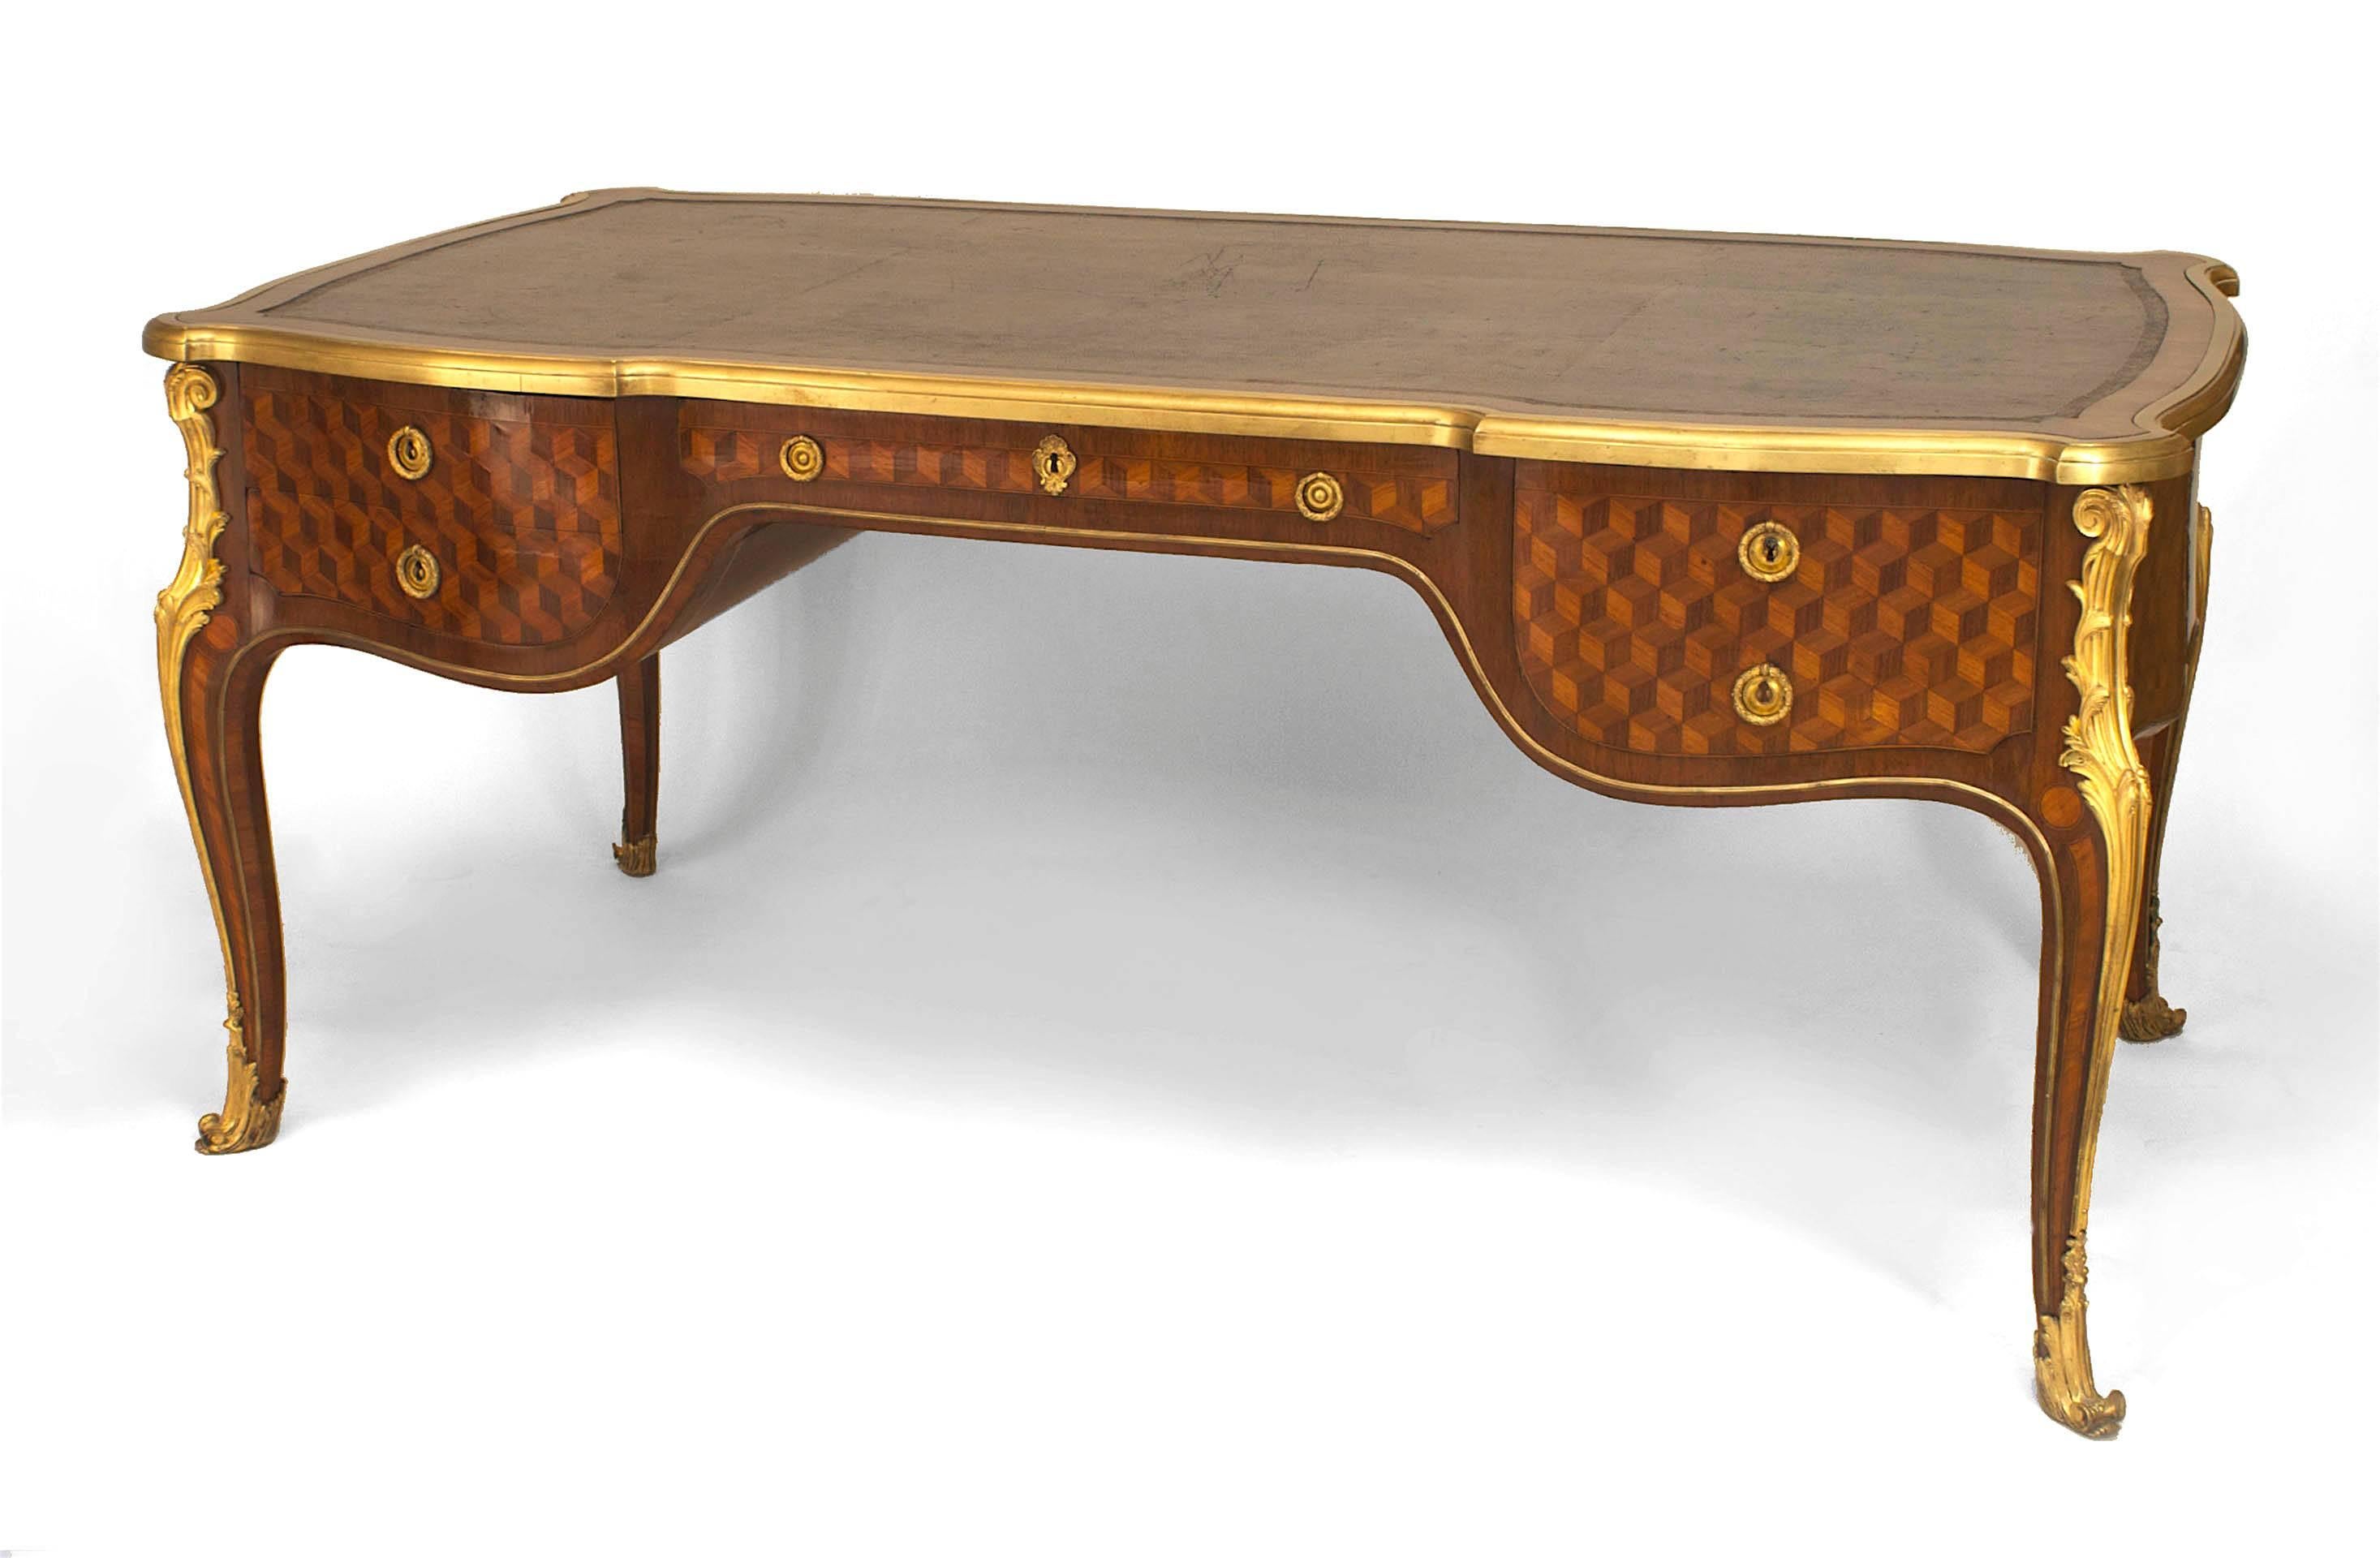 Louis XV style (19th Century) parquetry inlaid gilt bronze trimmed bureau plat desk with a leather top bordered with mahogany over 5 drawers supported on cabriole legs.
